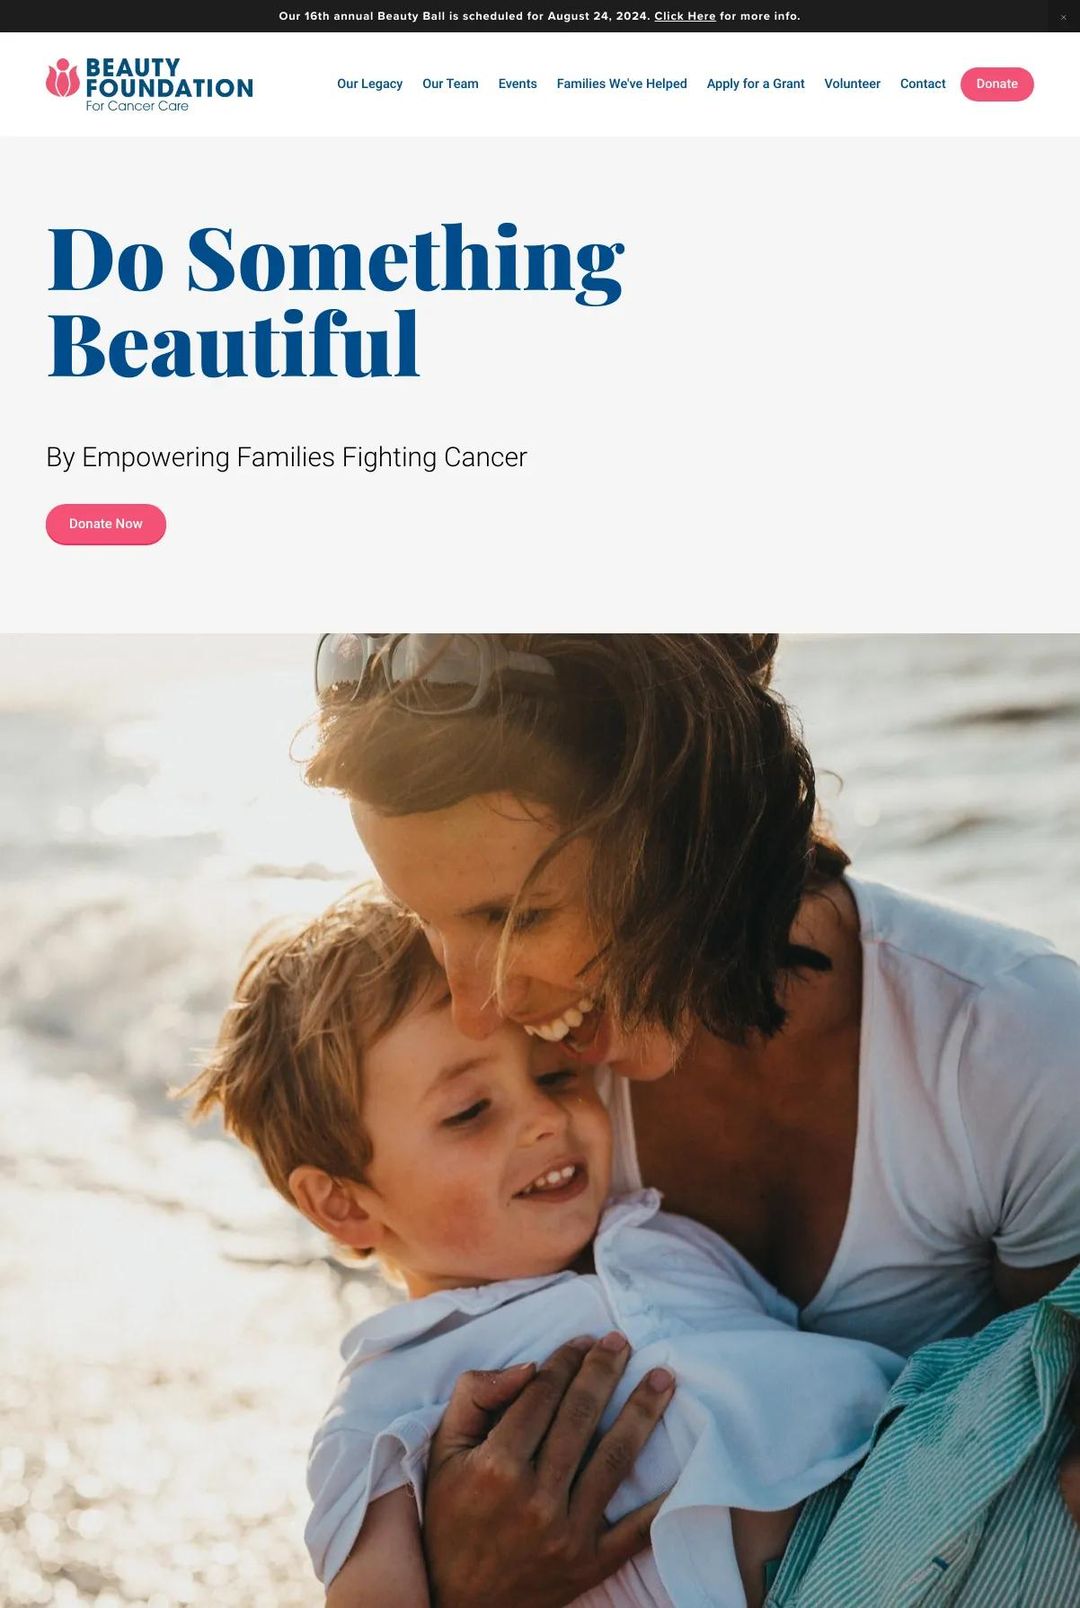 Screenshot 1 of The Beauty Foundation for Cancer Care (Example Squarespace Nonprofit Website)